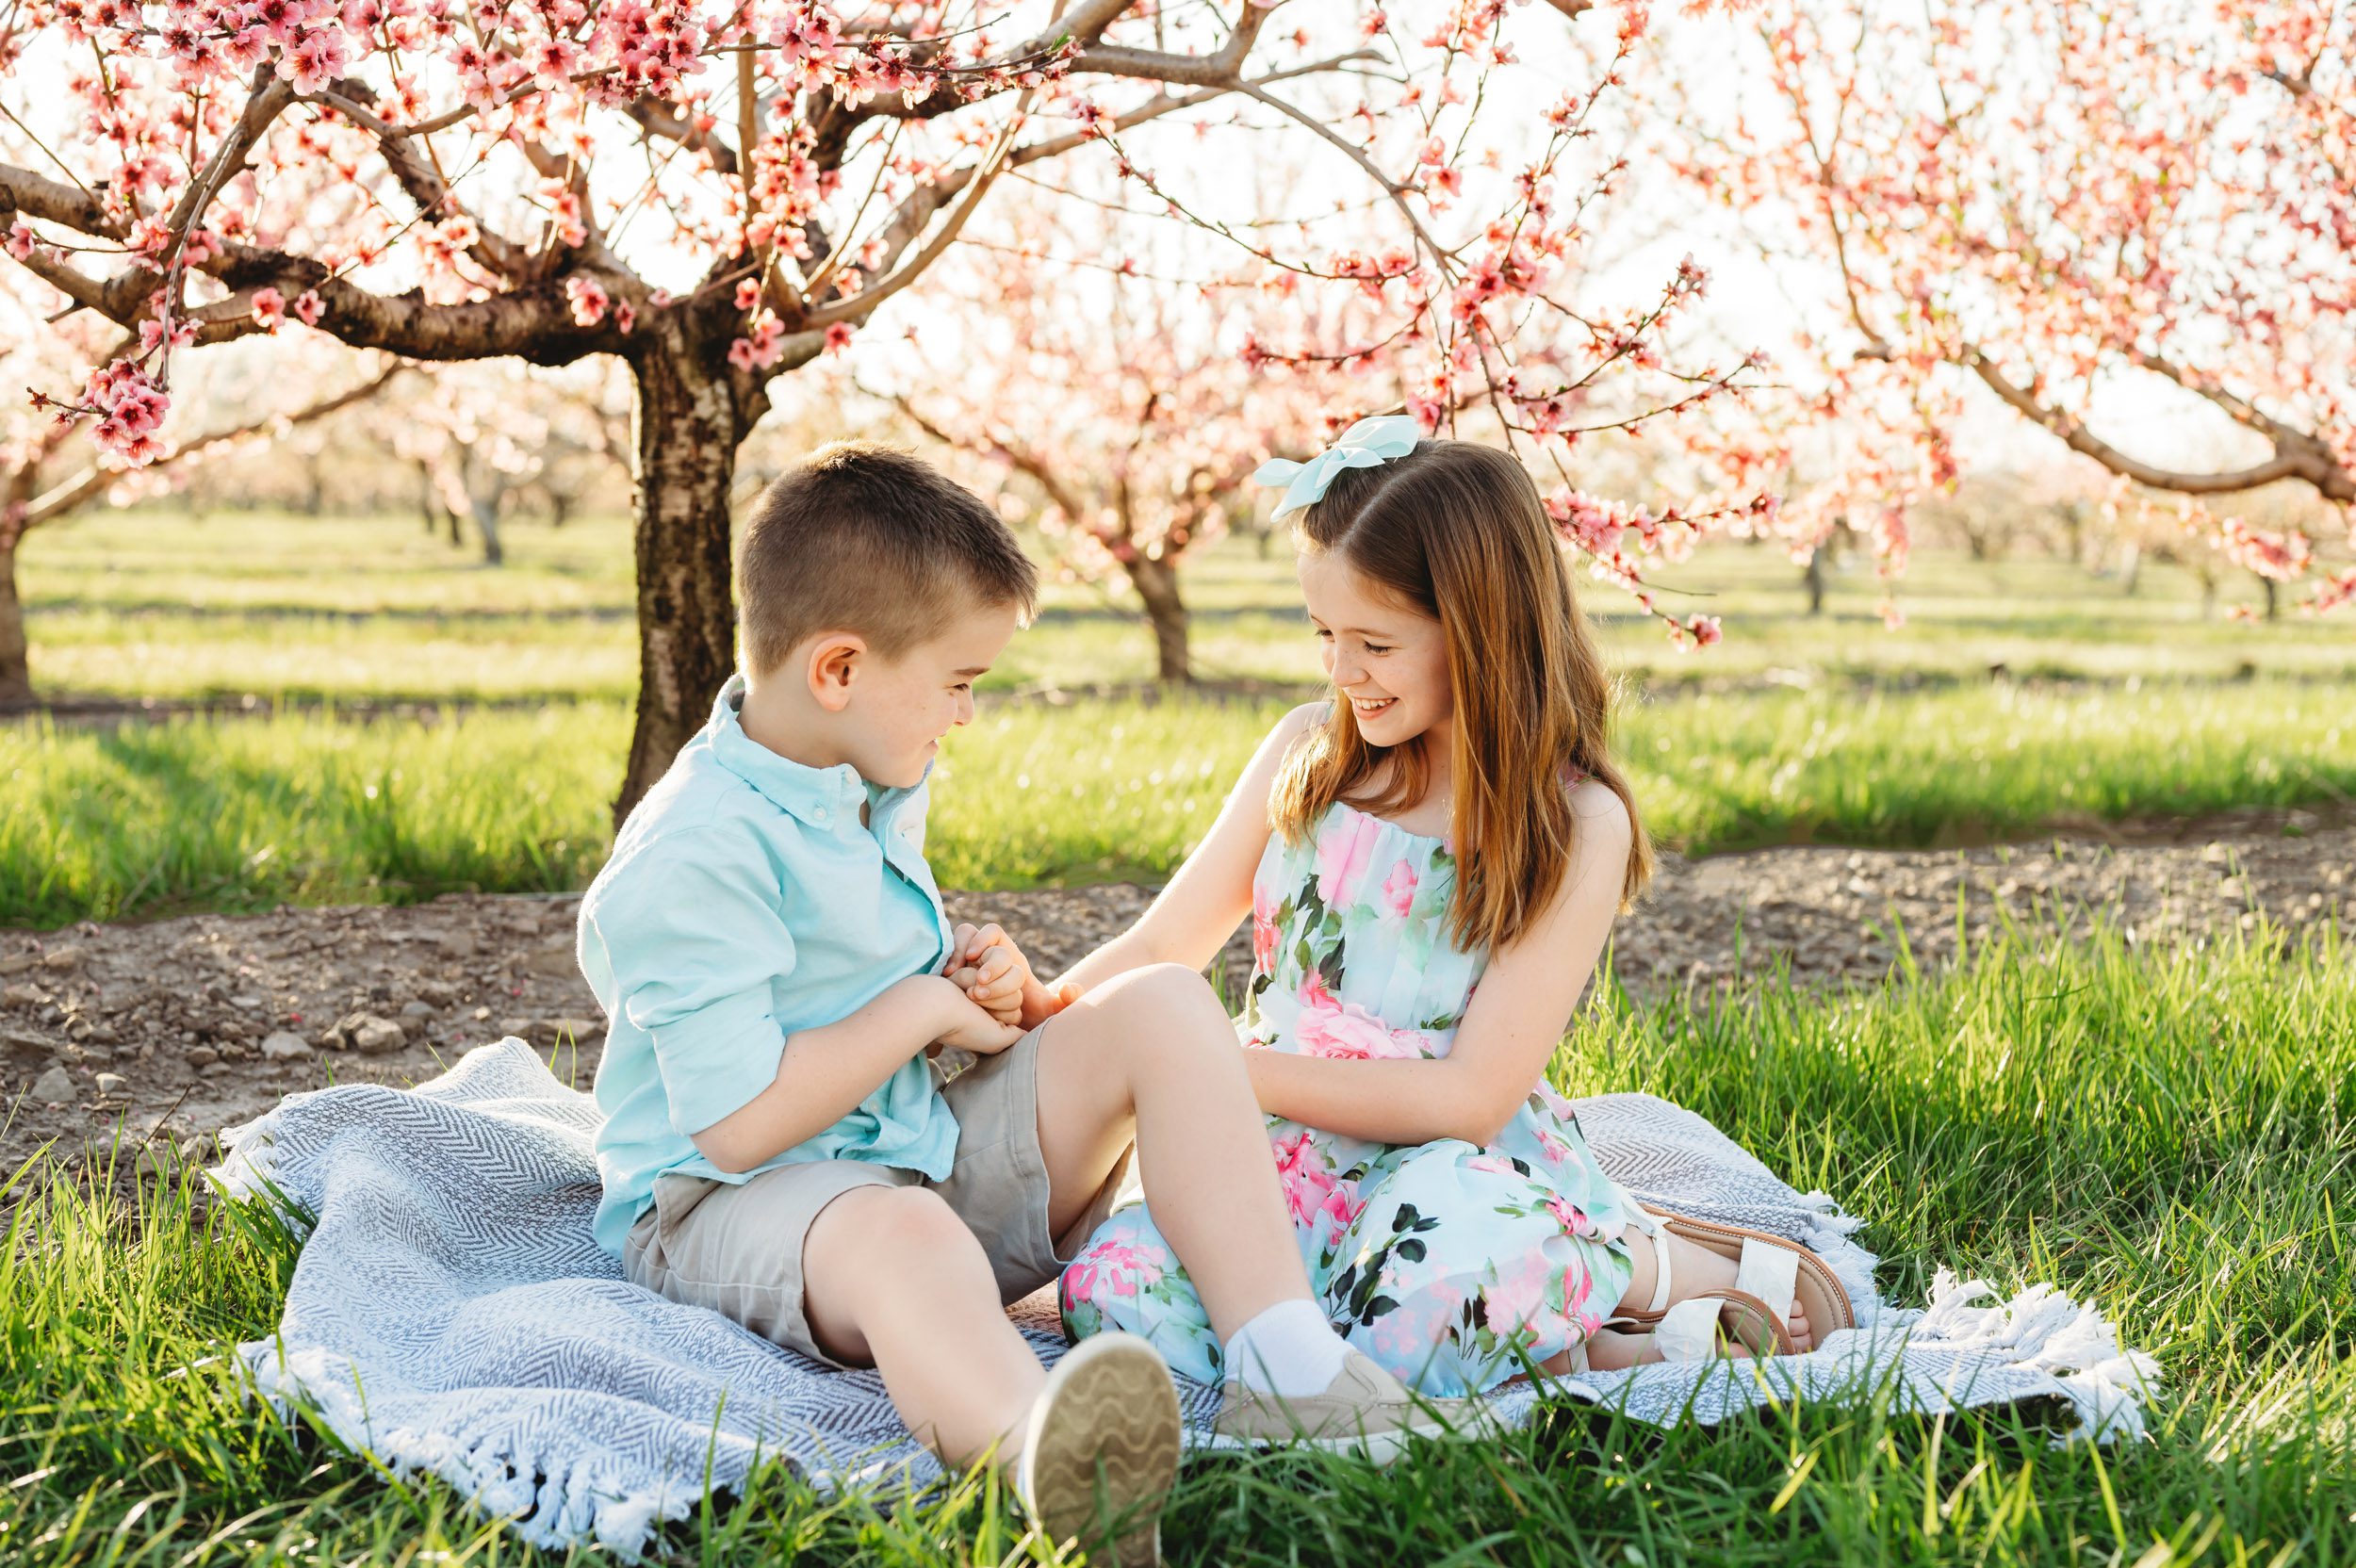 a brother and sister sitting on a blanket and tickling each other during a mini session in an orchard full of pink peach blossoms in bloom